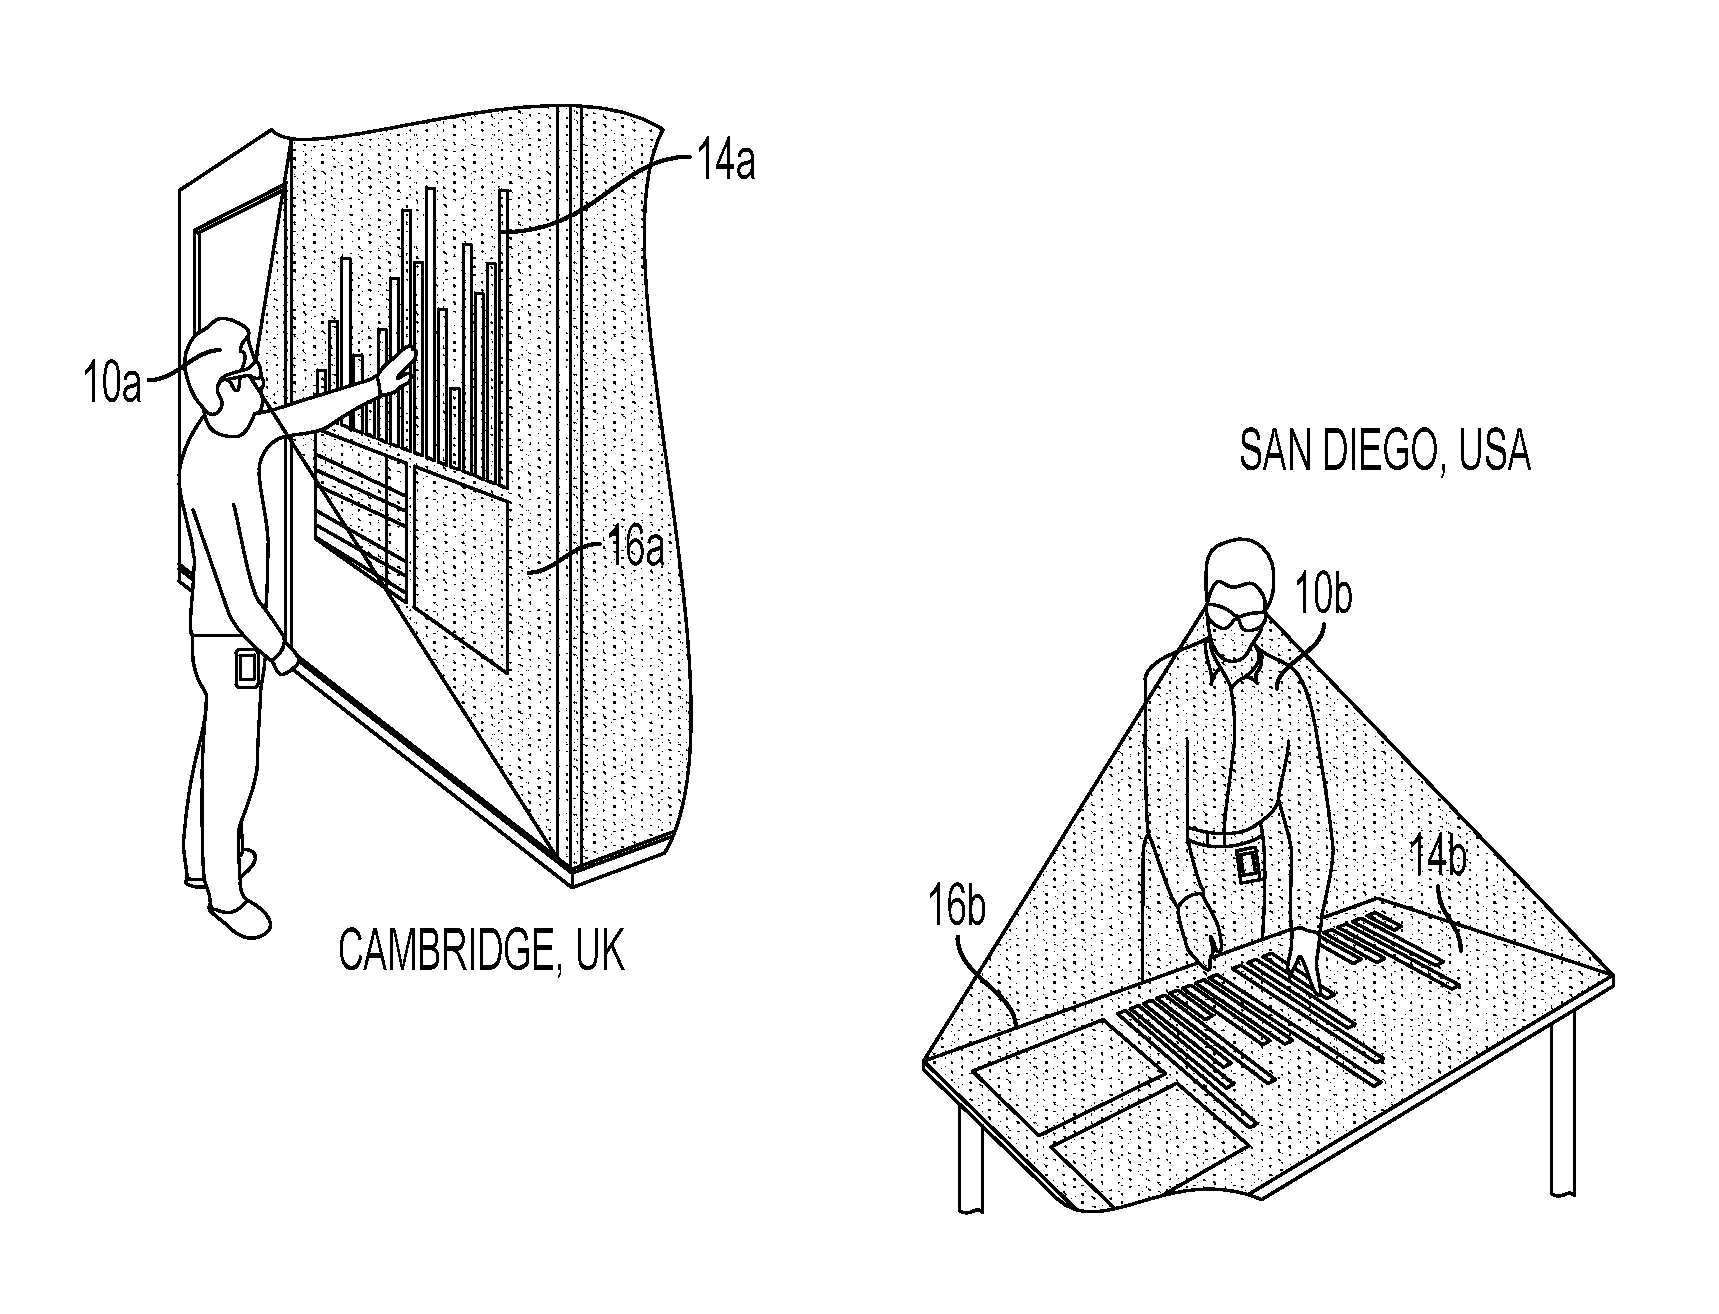 System for the rendering of shared digital interfaces relative to each user's point of view